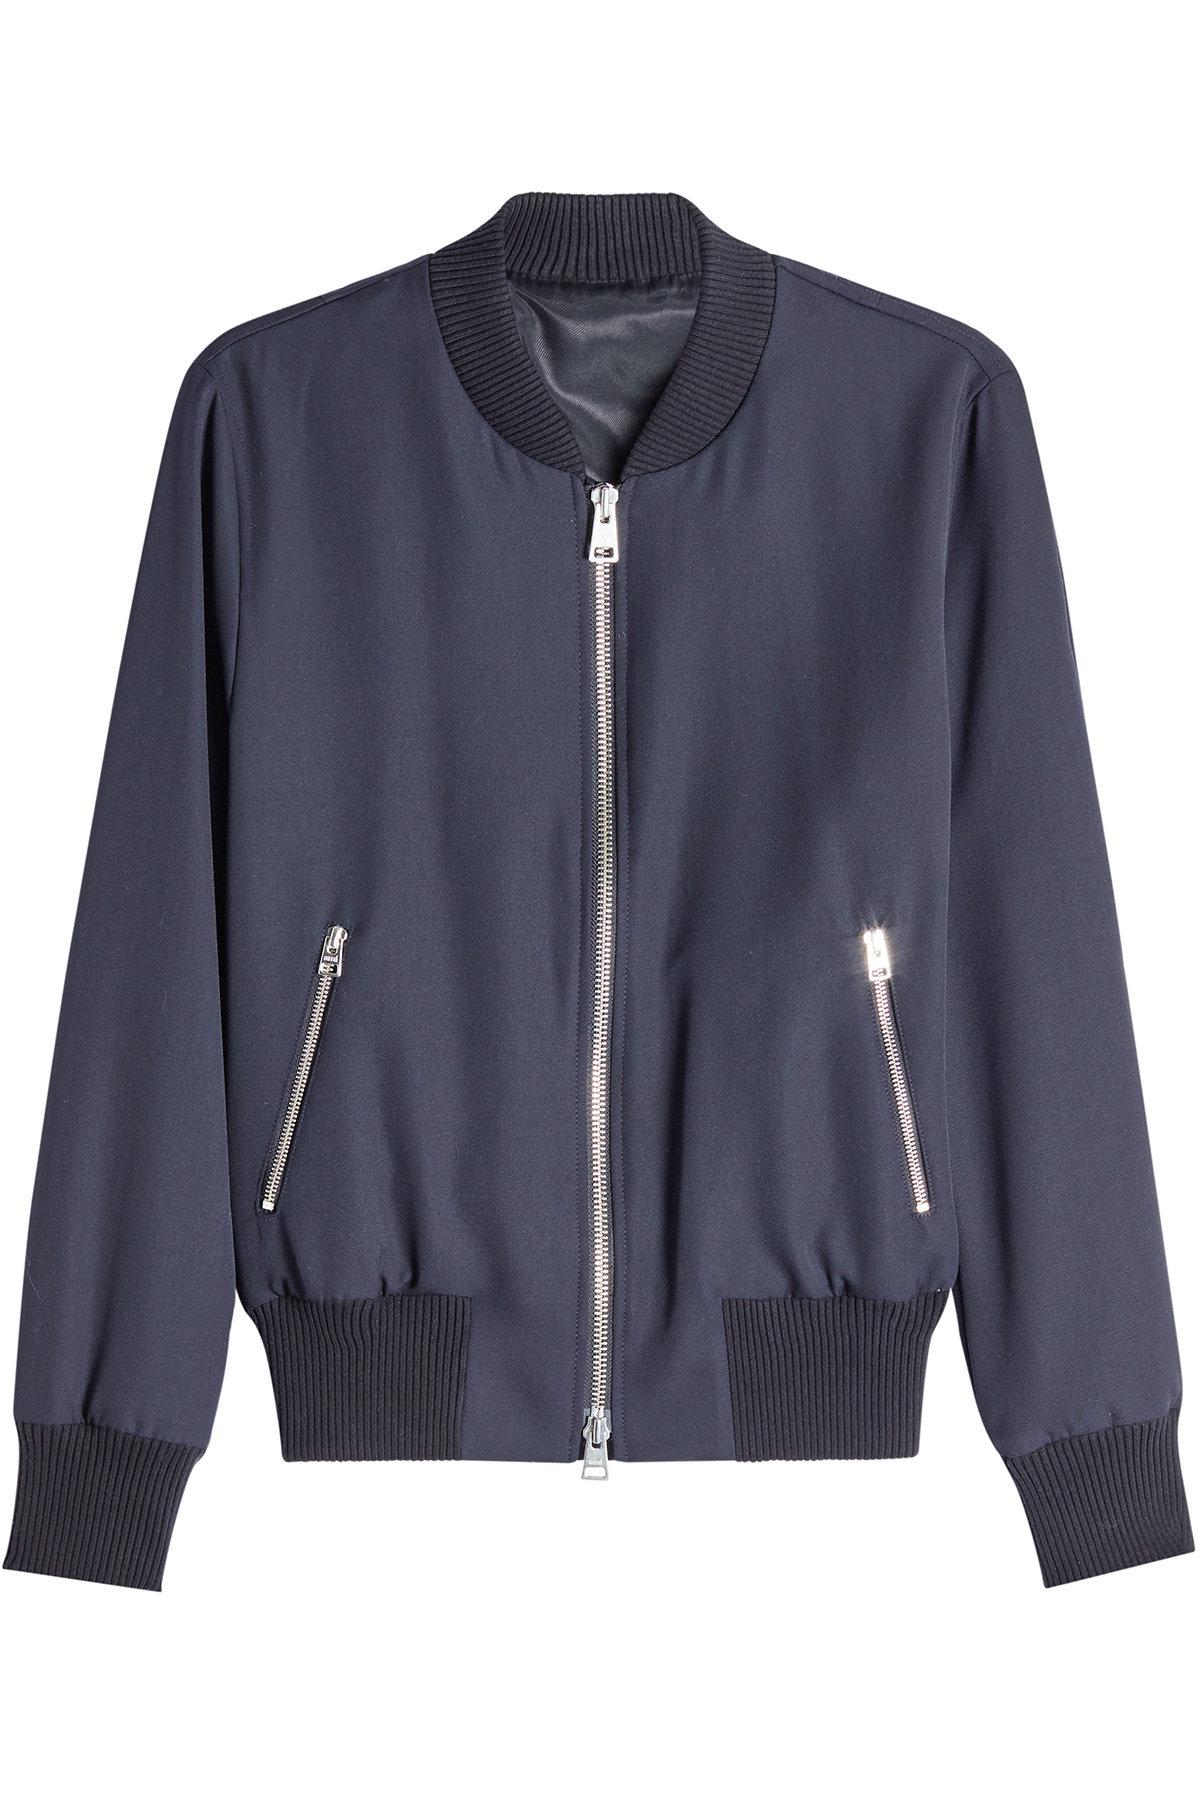 AMI Wool Bomber Jacket in Blue for Men - Lyst